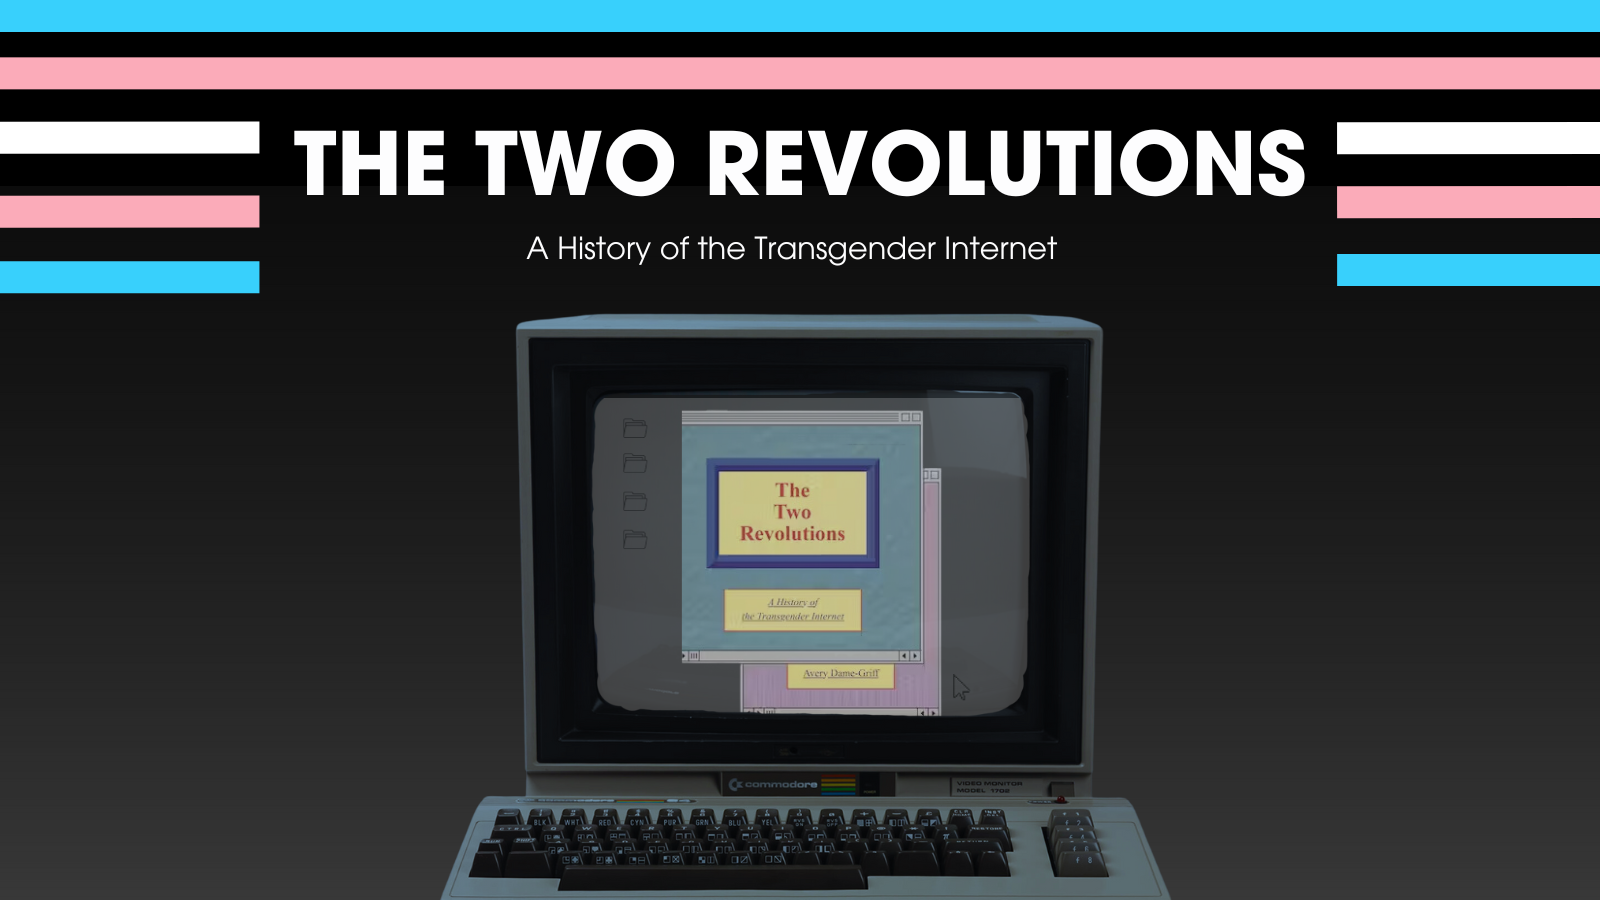 An 80s computer displays the cover of Avery Dame Griff's Book The Two Revolutions